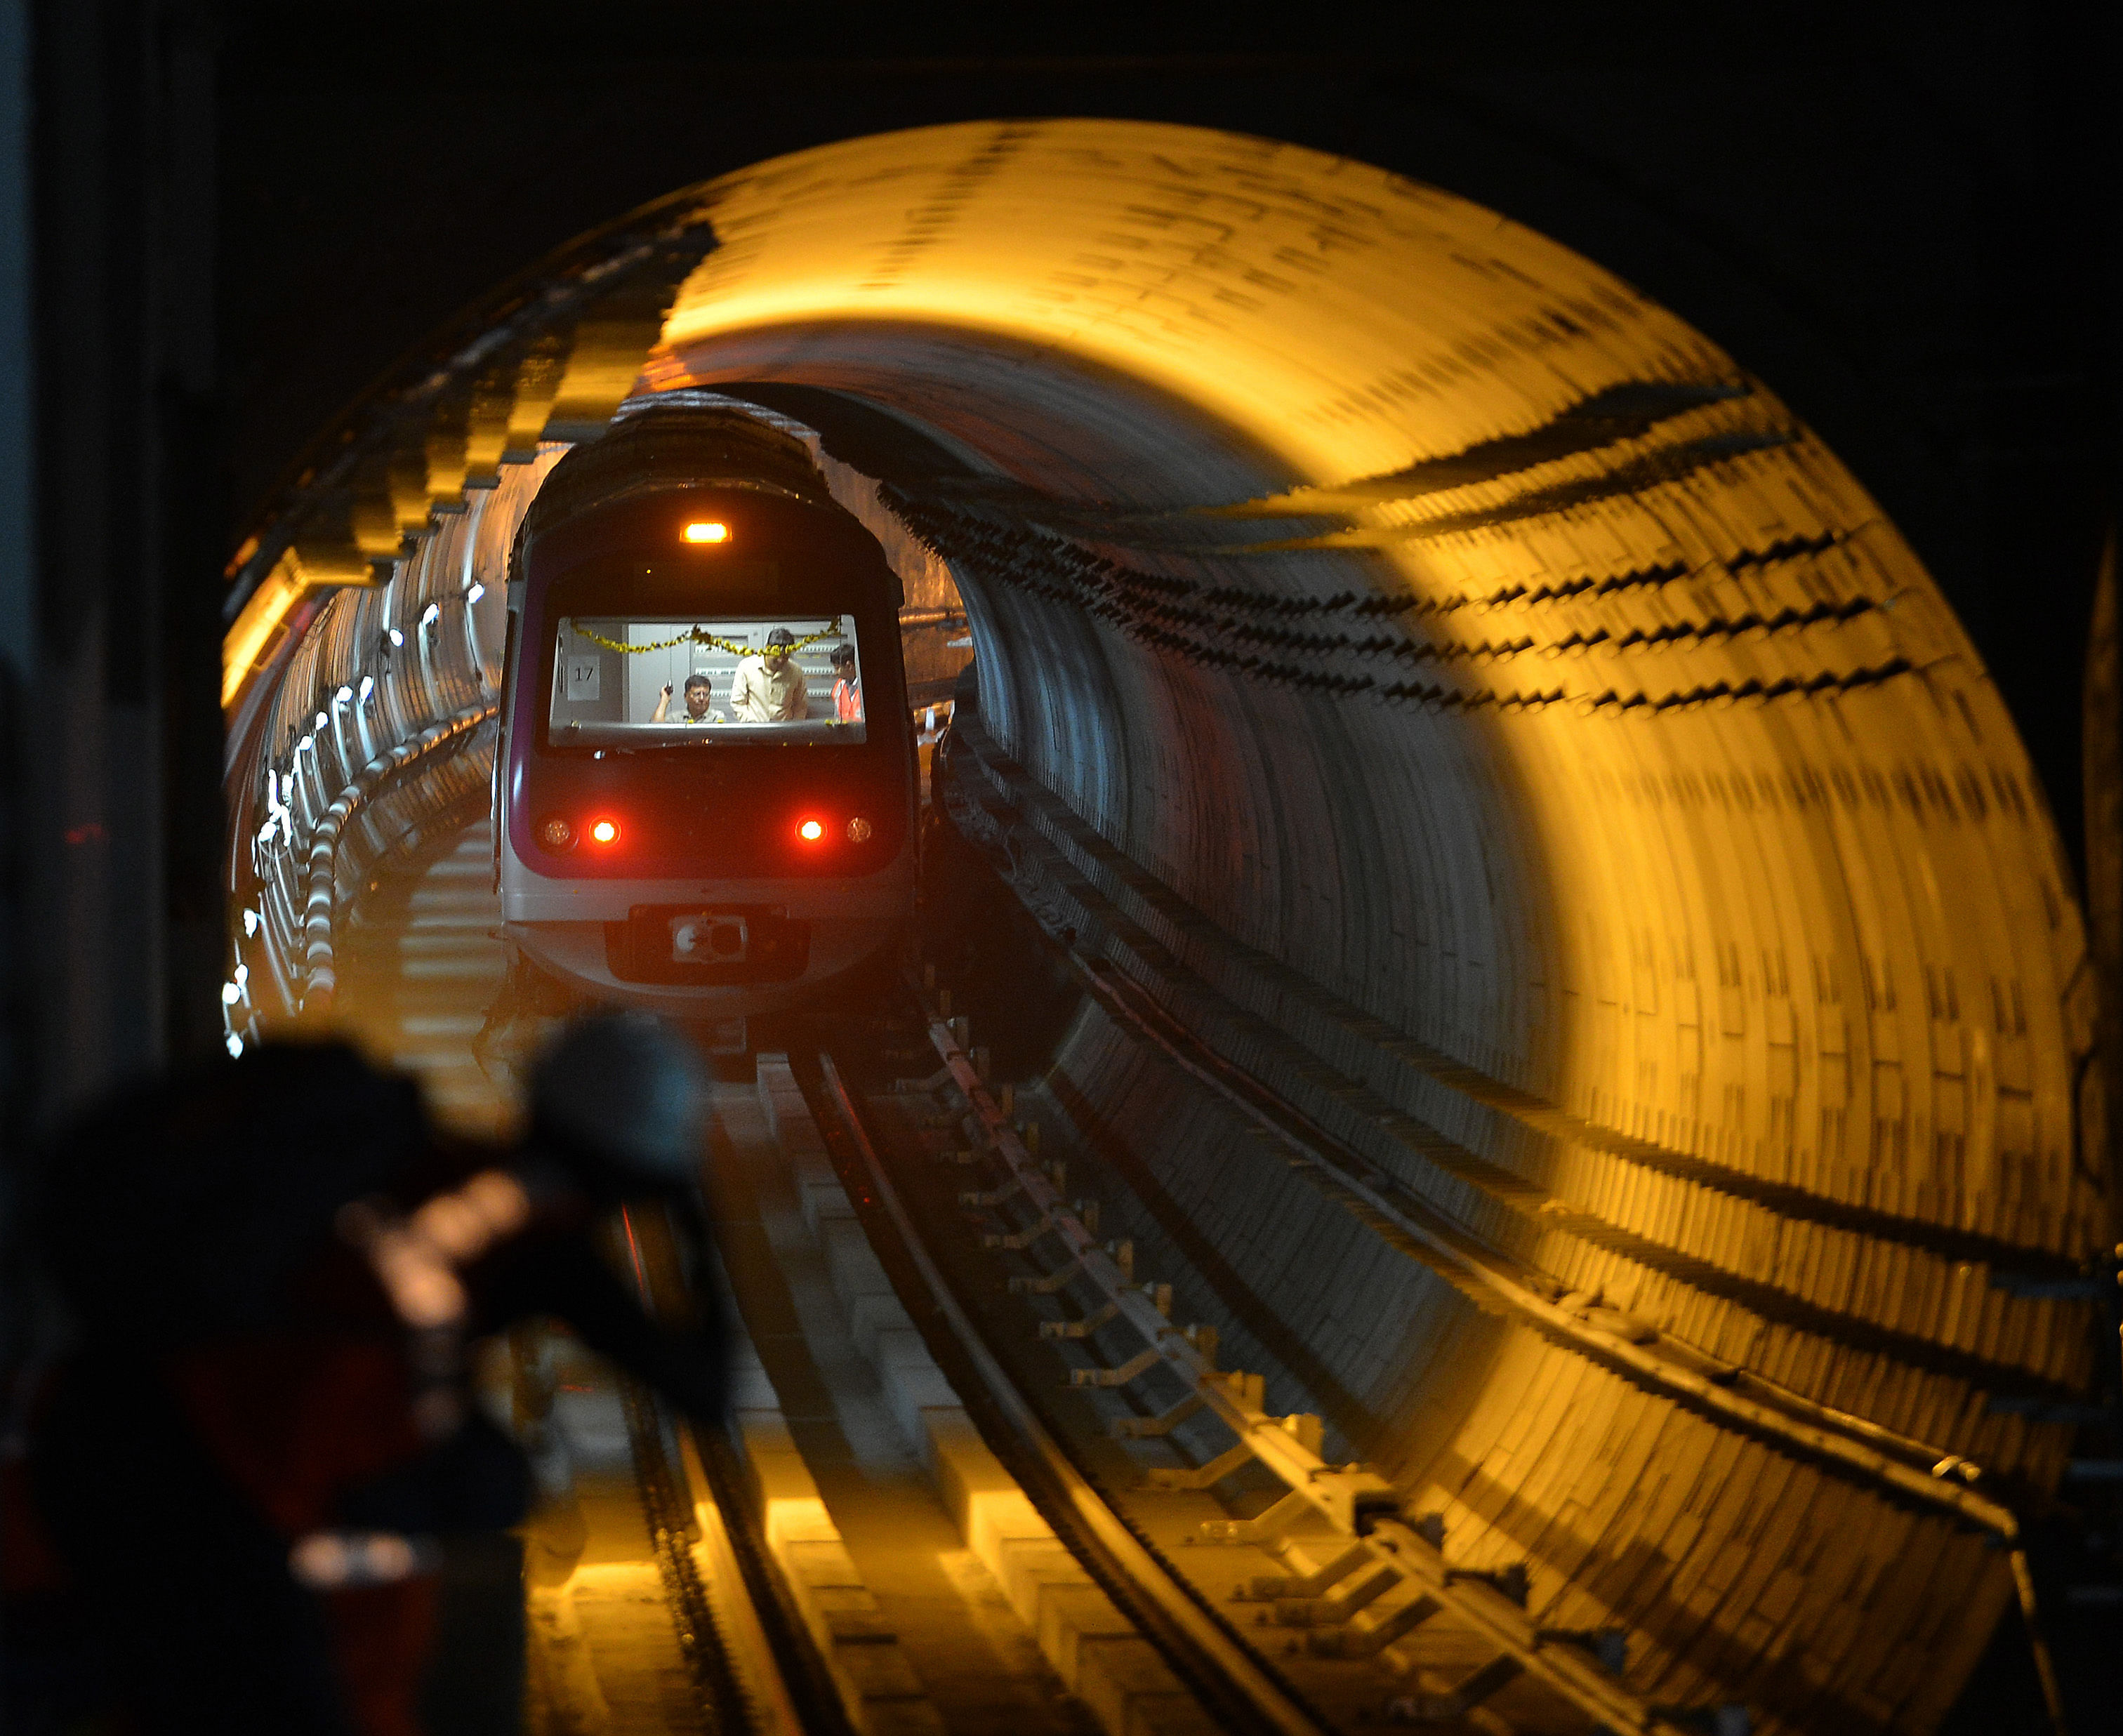 The deadline for the project was set based on the Delhi model but Bengaluru's geology delayed opening of the underground section. DH Photo.